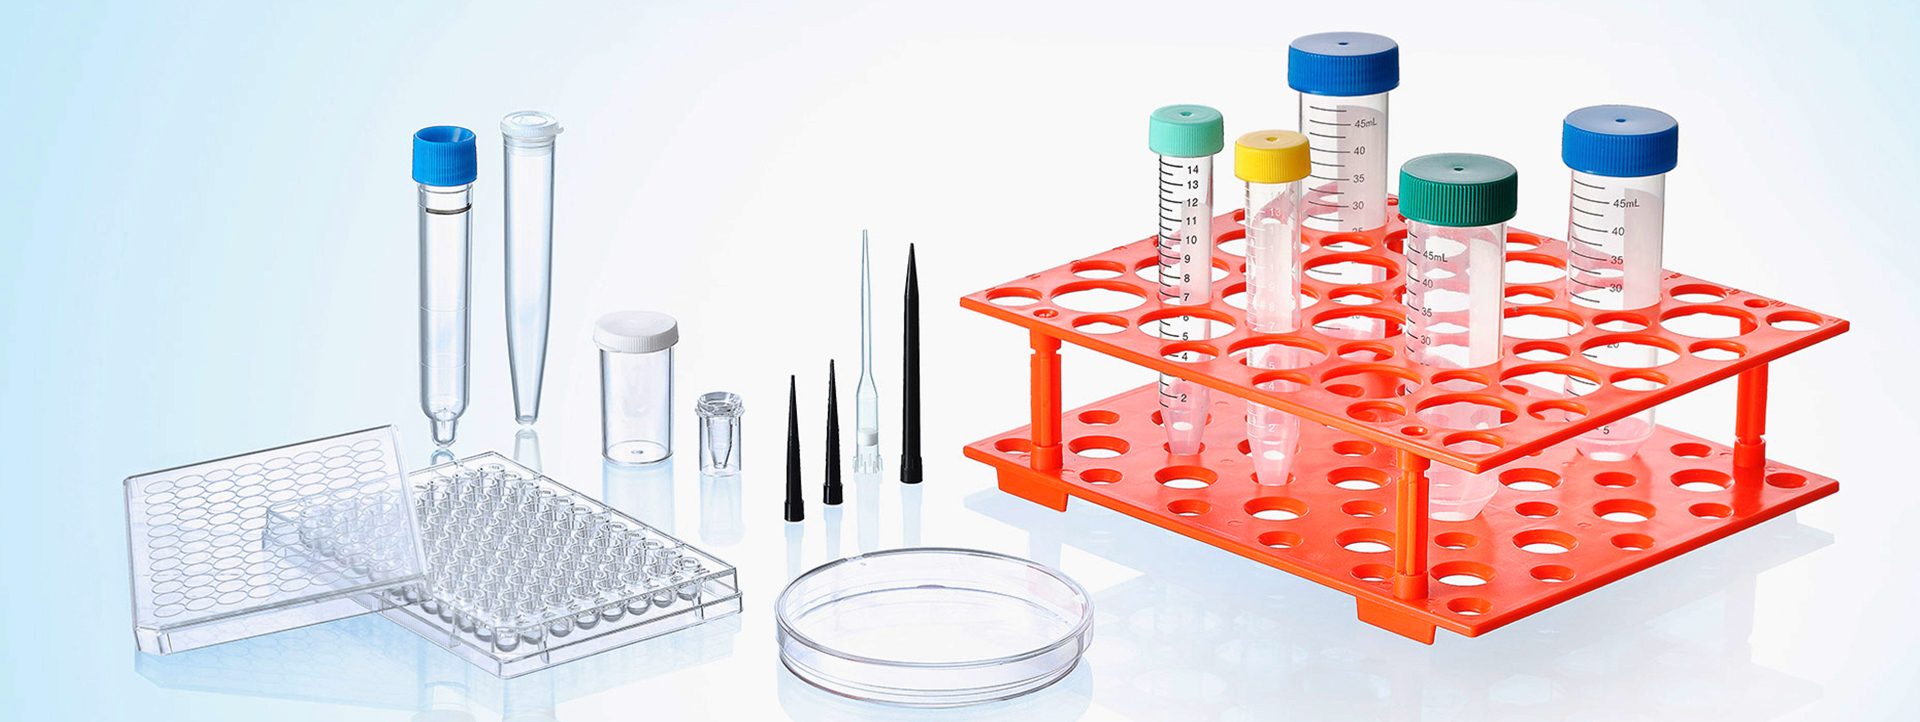 pipette tip, Centrifuge tube, Cryovial, Petri dish, Urine Container, Stool Container, Serological Pipette, sample cup, ESR Pipette, Microscope slide, Cover Glass, Transport Swab, Transfer pipette, Embedding cassette, cell culture plate, test tube, ELISA Plate, PCR Tube